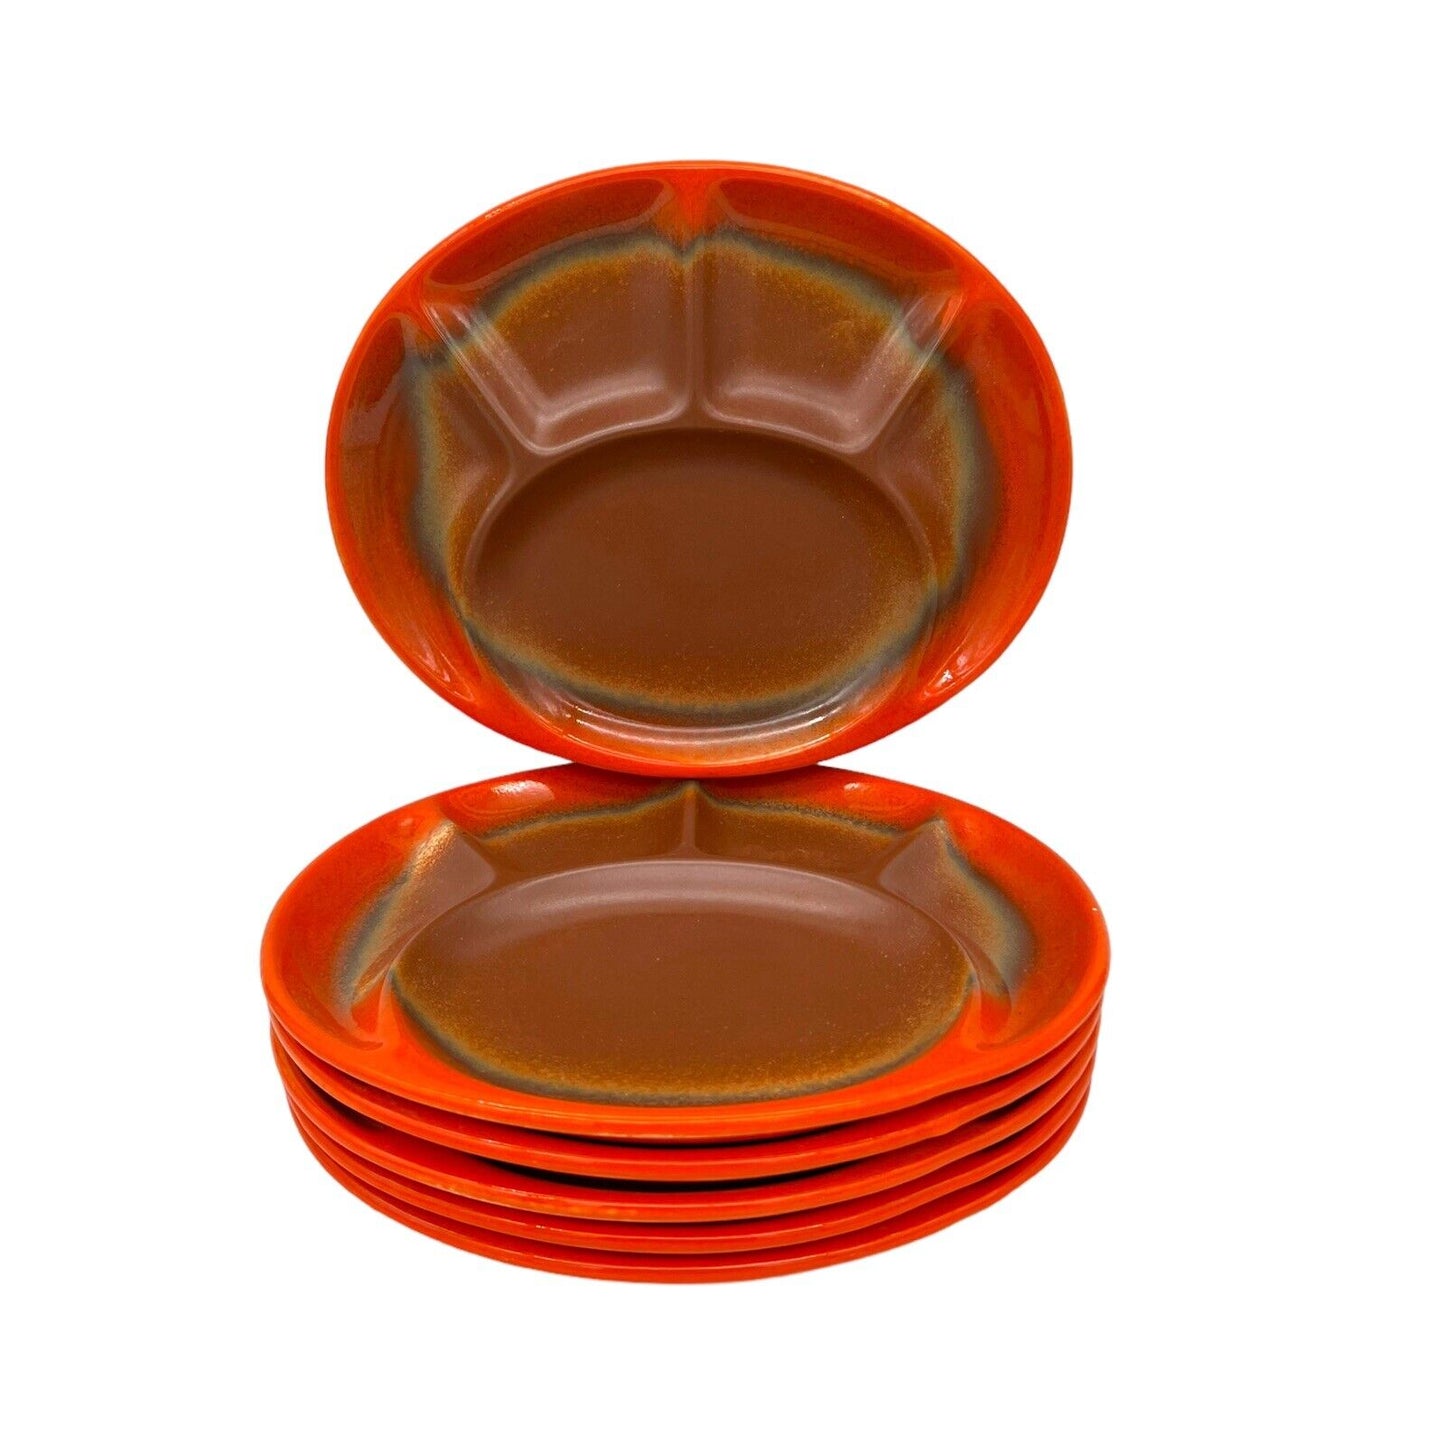 French retro mid century fondue plate set sold by All Things French Store